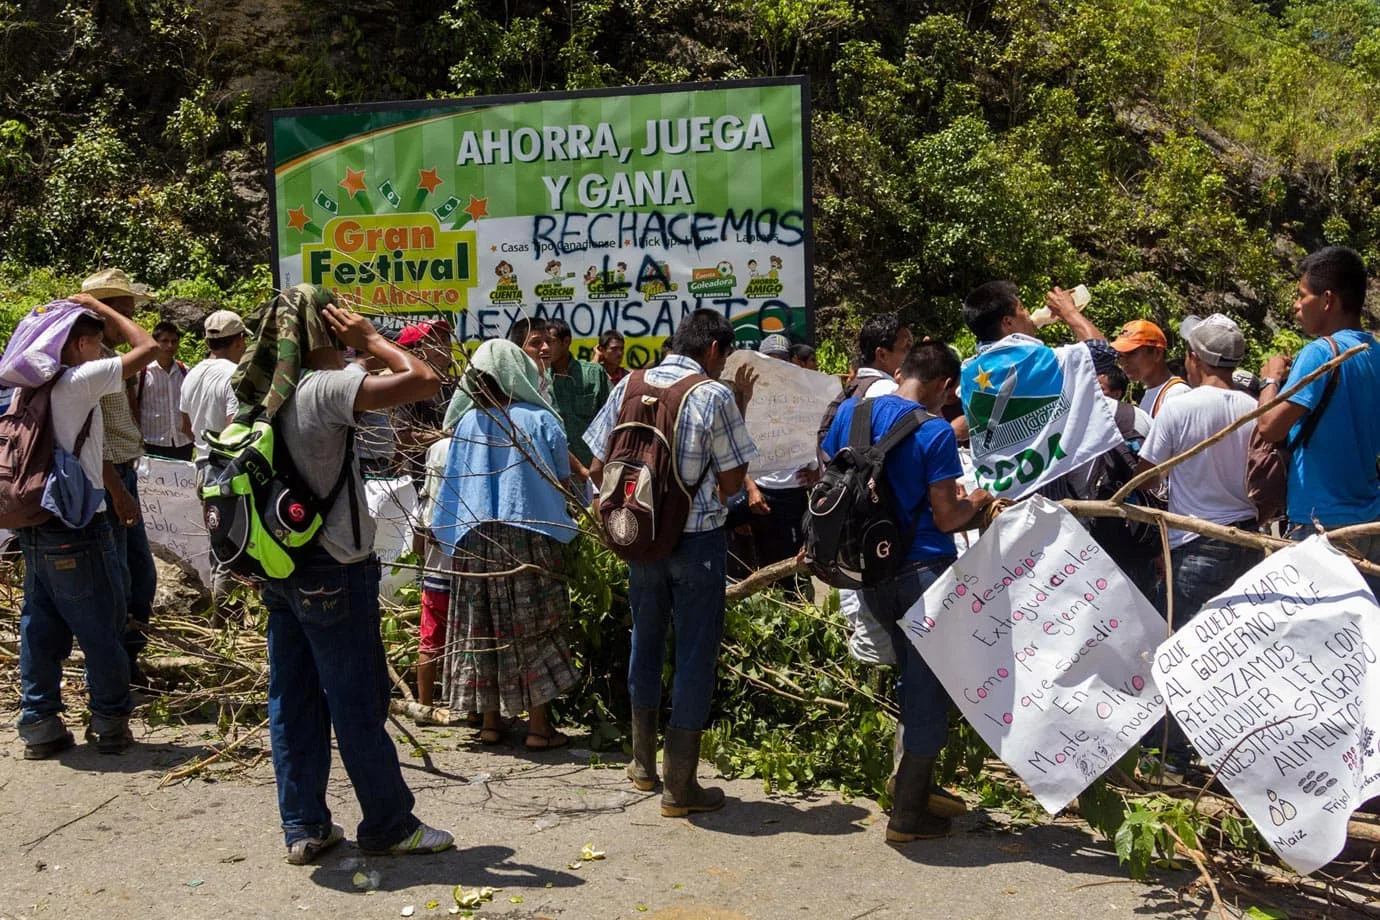 Protests over the price of maize seeds were going on throughout Guatemala